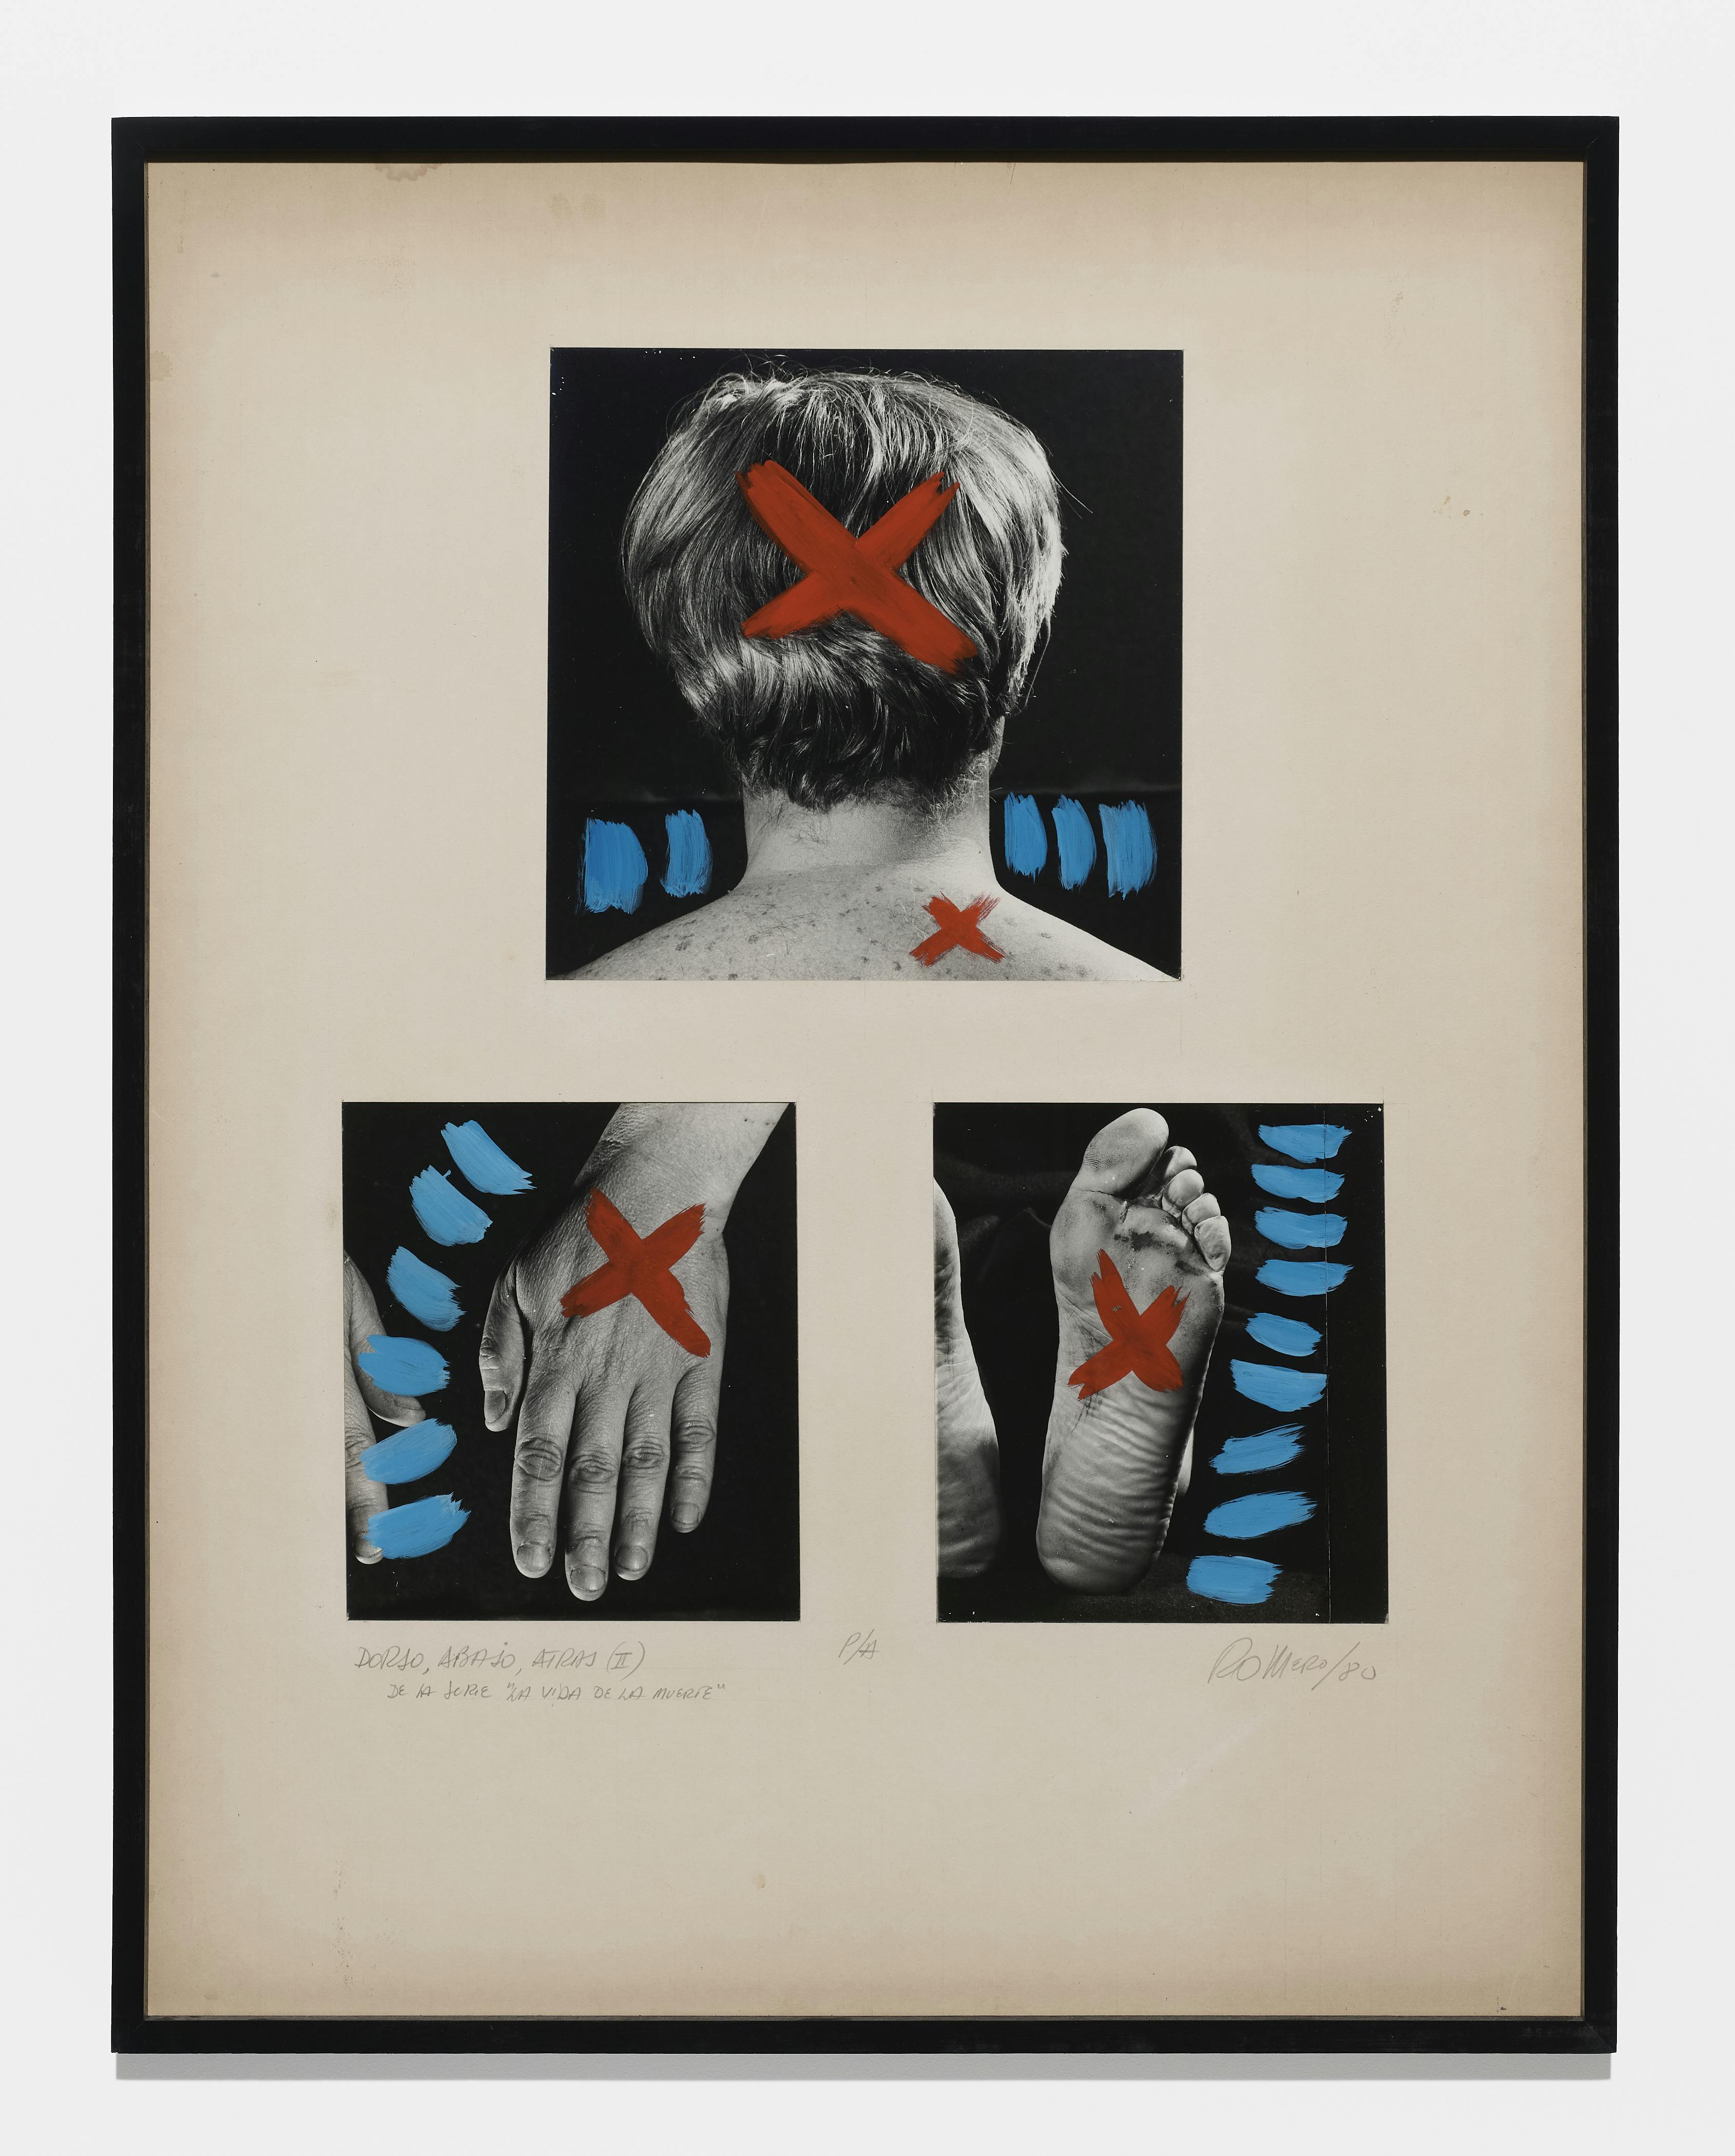 On a sheet of white paper, three black-and-white photographs are arranged in two rows. On the top row is a close-up image of the back of the artist Juan Carlos Romero’s head. On the bottom row, respectively, a picture of the back of a hand and the bottom of a foot. On each of these images, bright red X’s and blue striping are painted over top. The X’s appear in the center of the body parts, while the blue striping takes up the negative space around their edges.